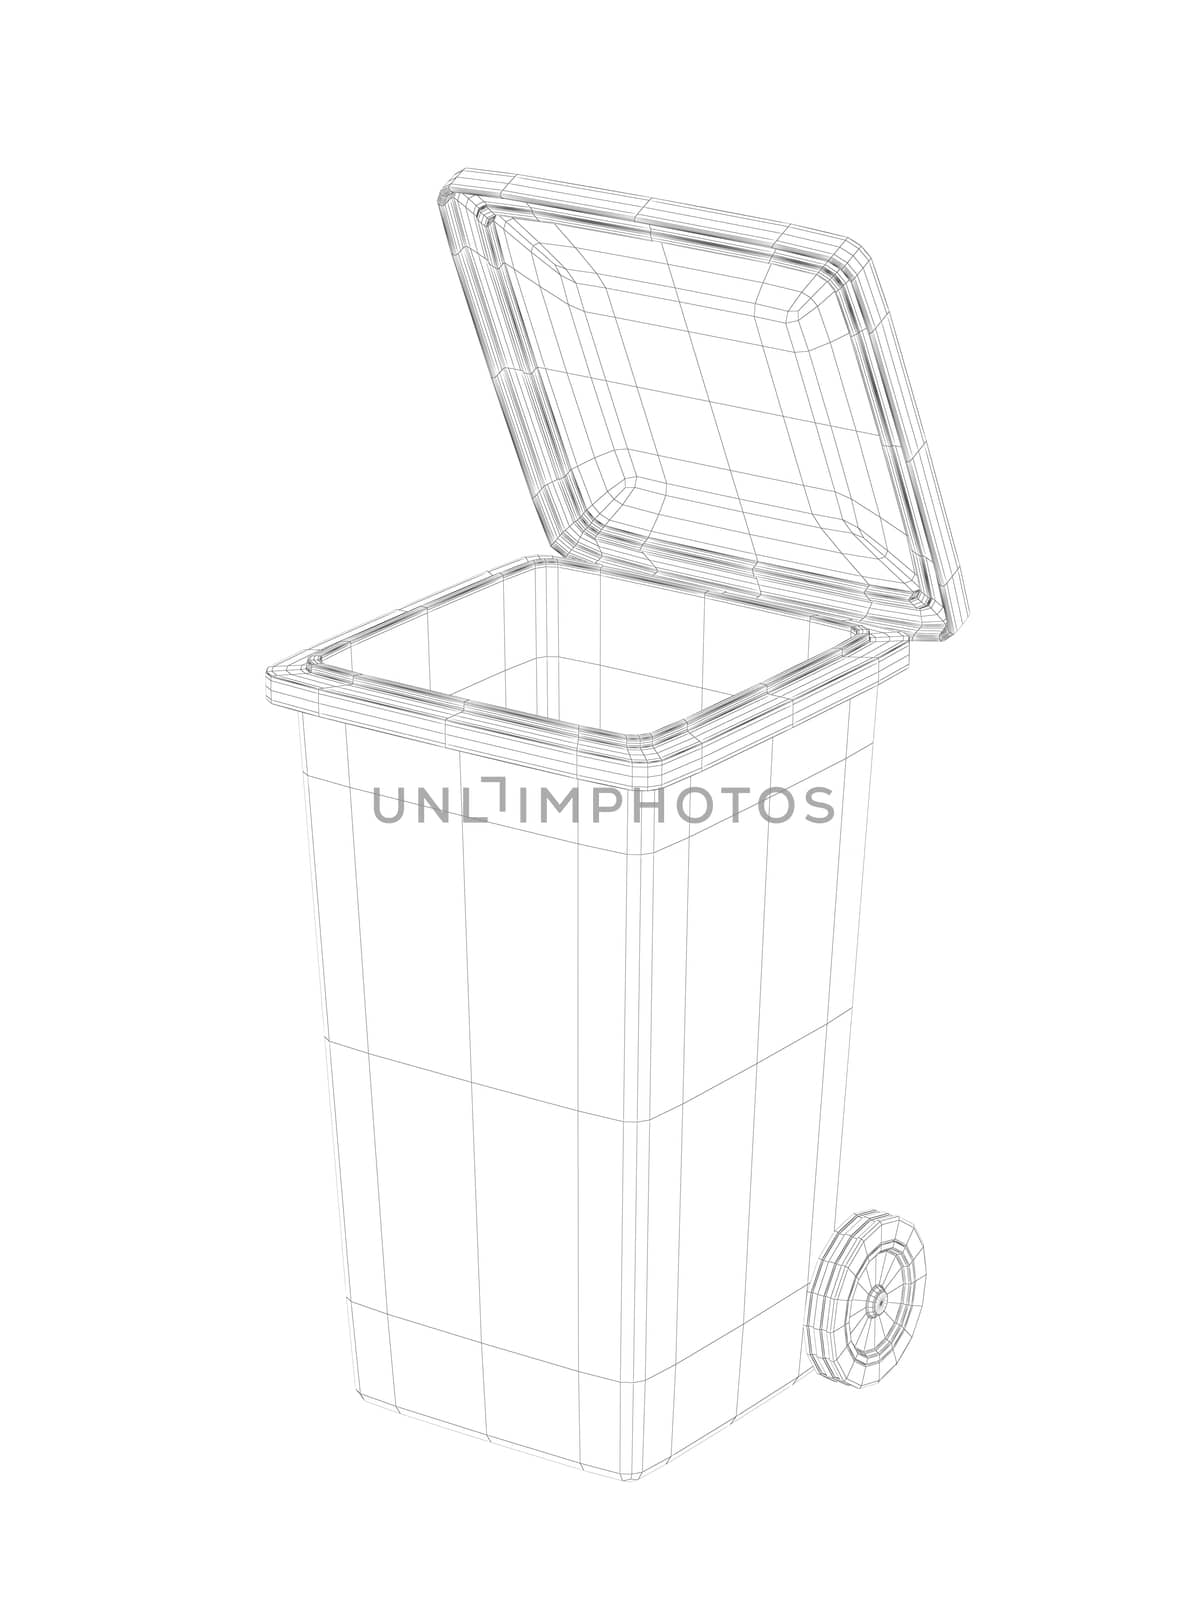 3D wire-frame model of waste container on white background
